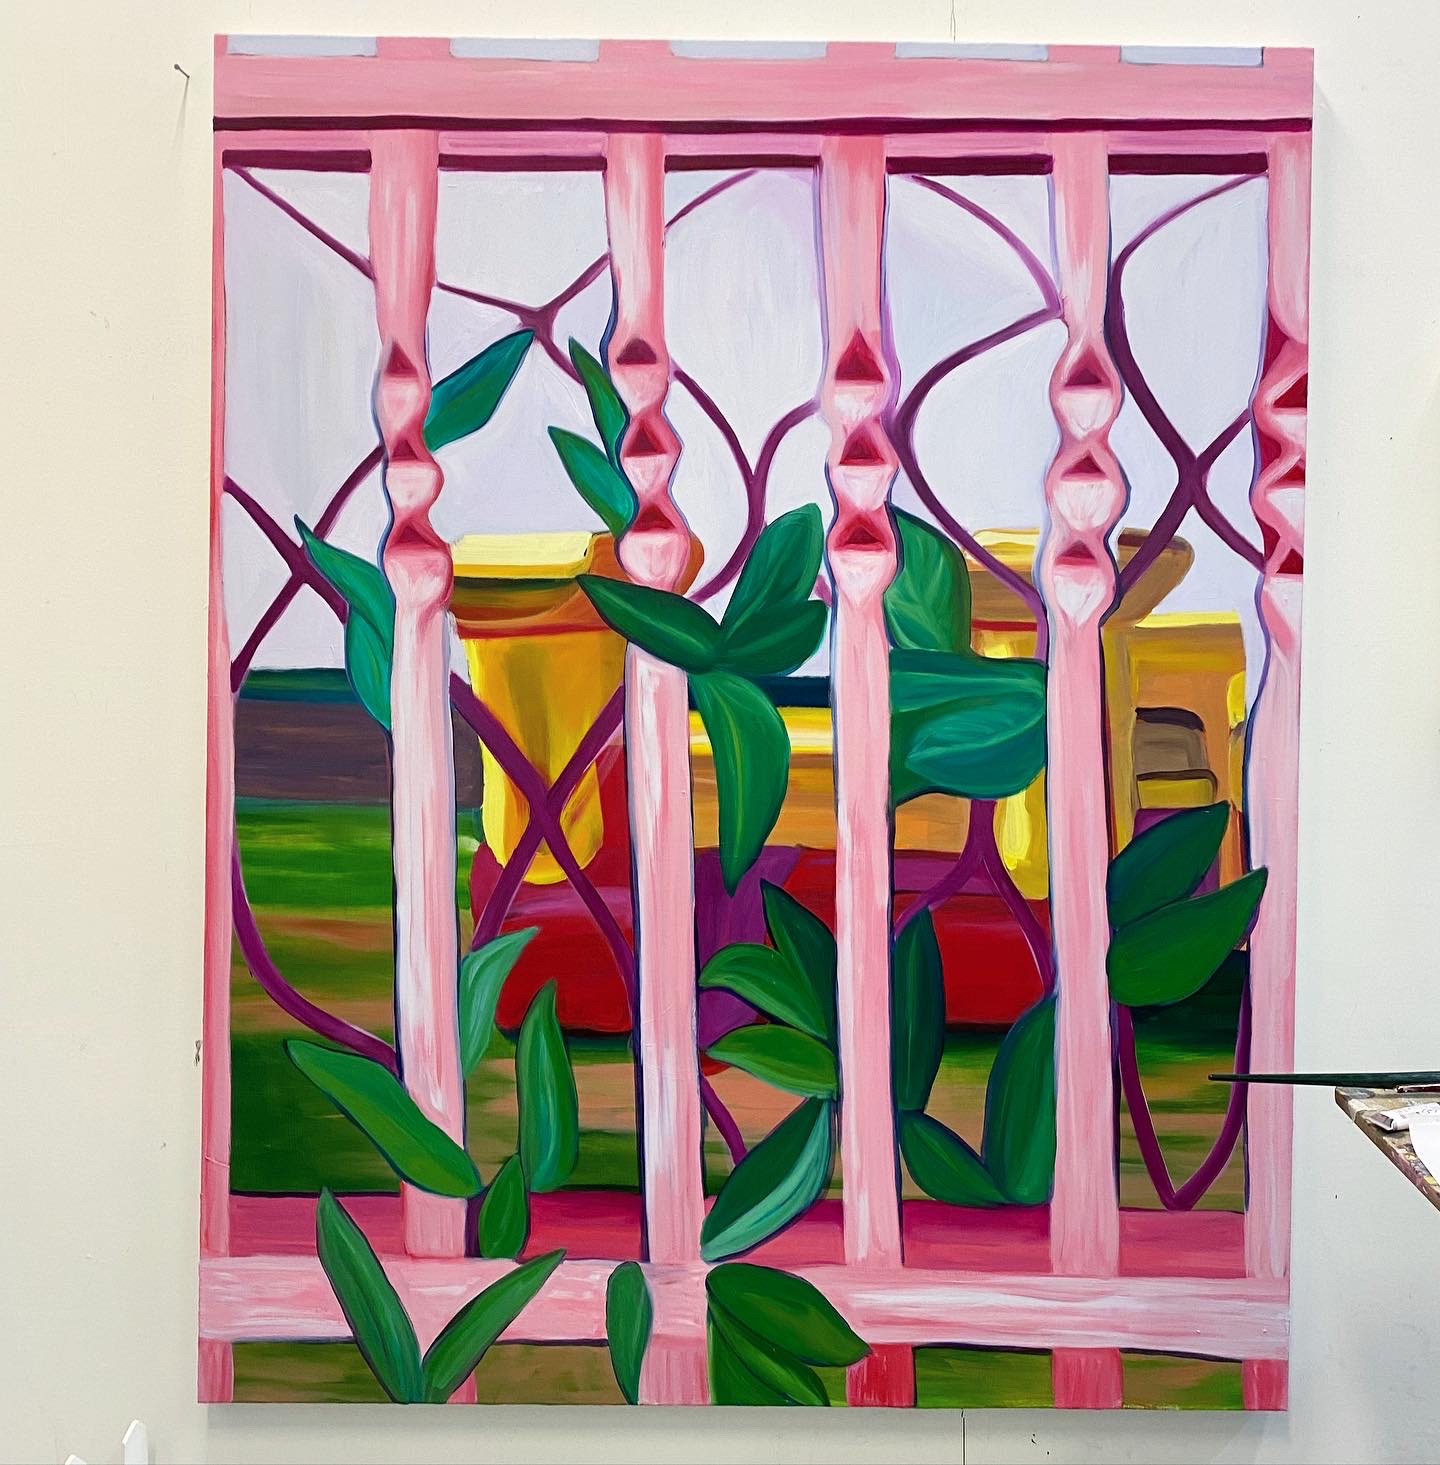 A painting of a yellow bouncy castle, seen through the pink bars of a fence.